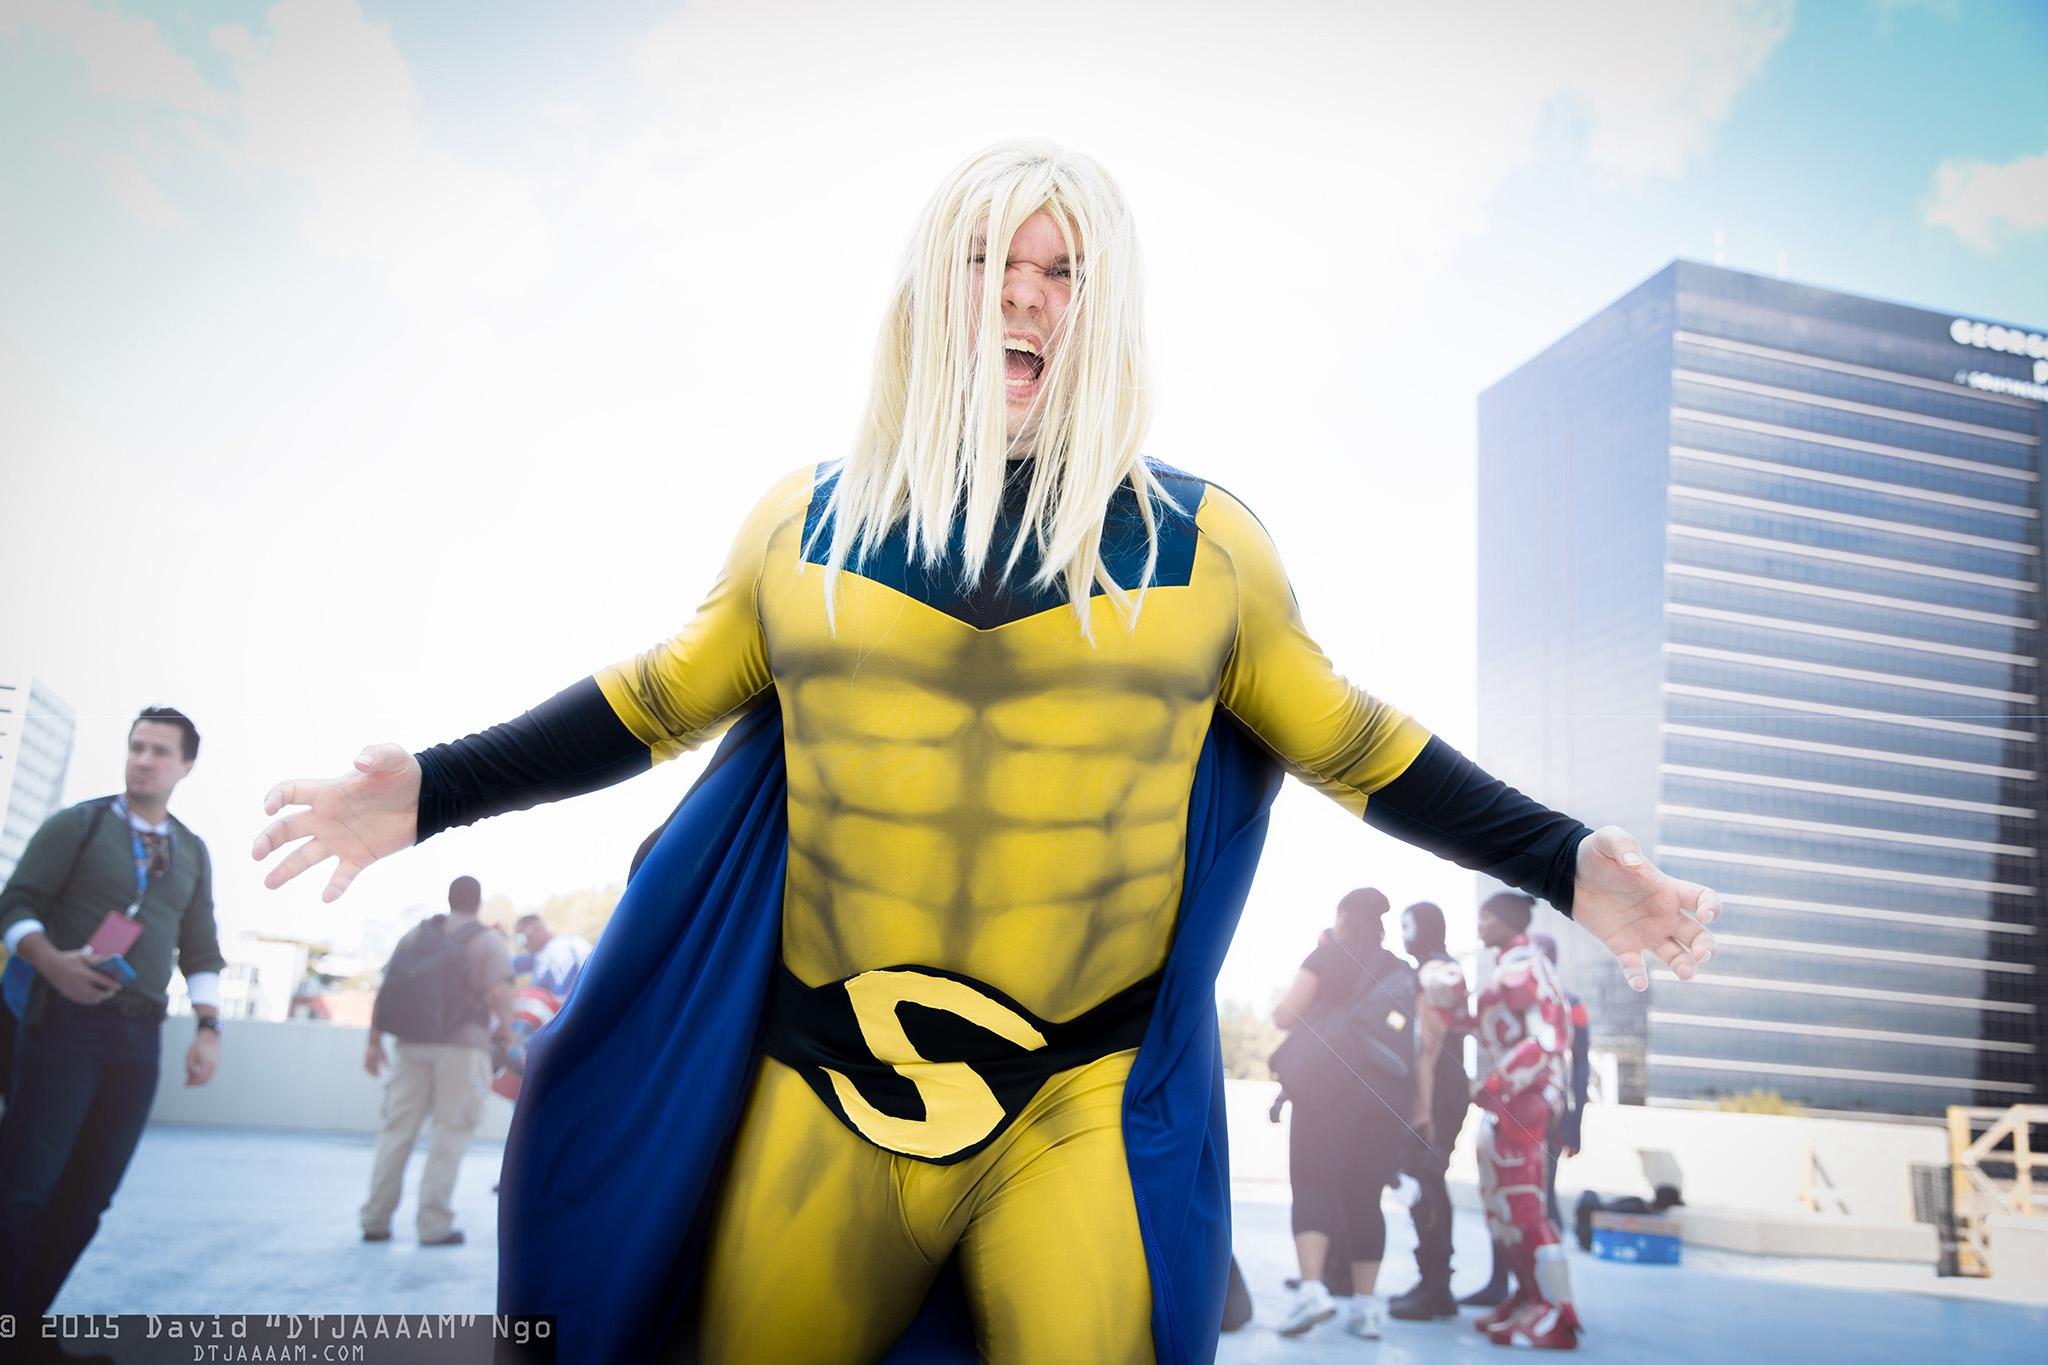 “Uncommon Marvel costumes: Sentry, Helen Cho, Mojo, and Arcade. #cosplay #d...